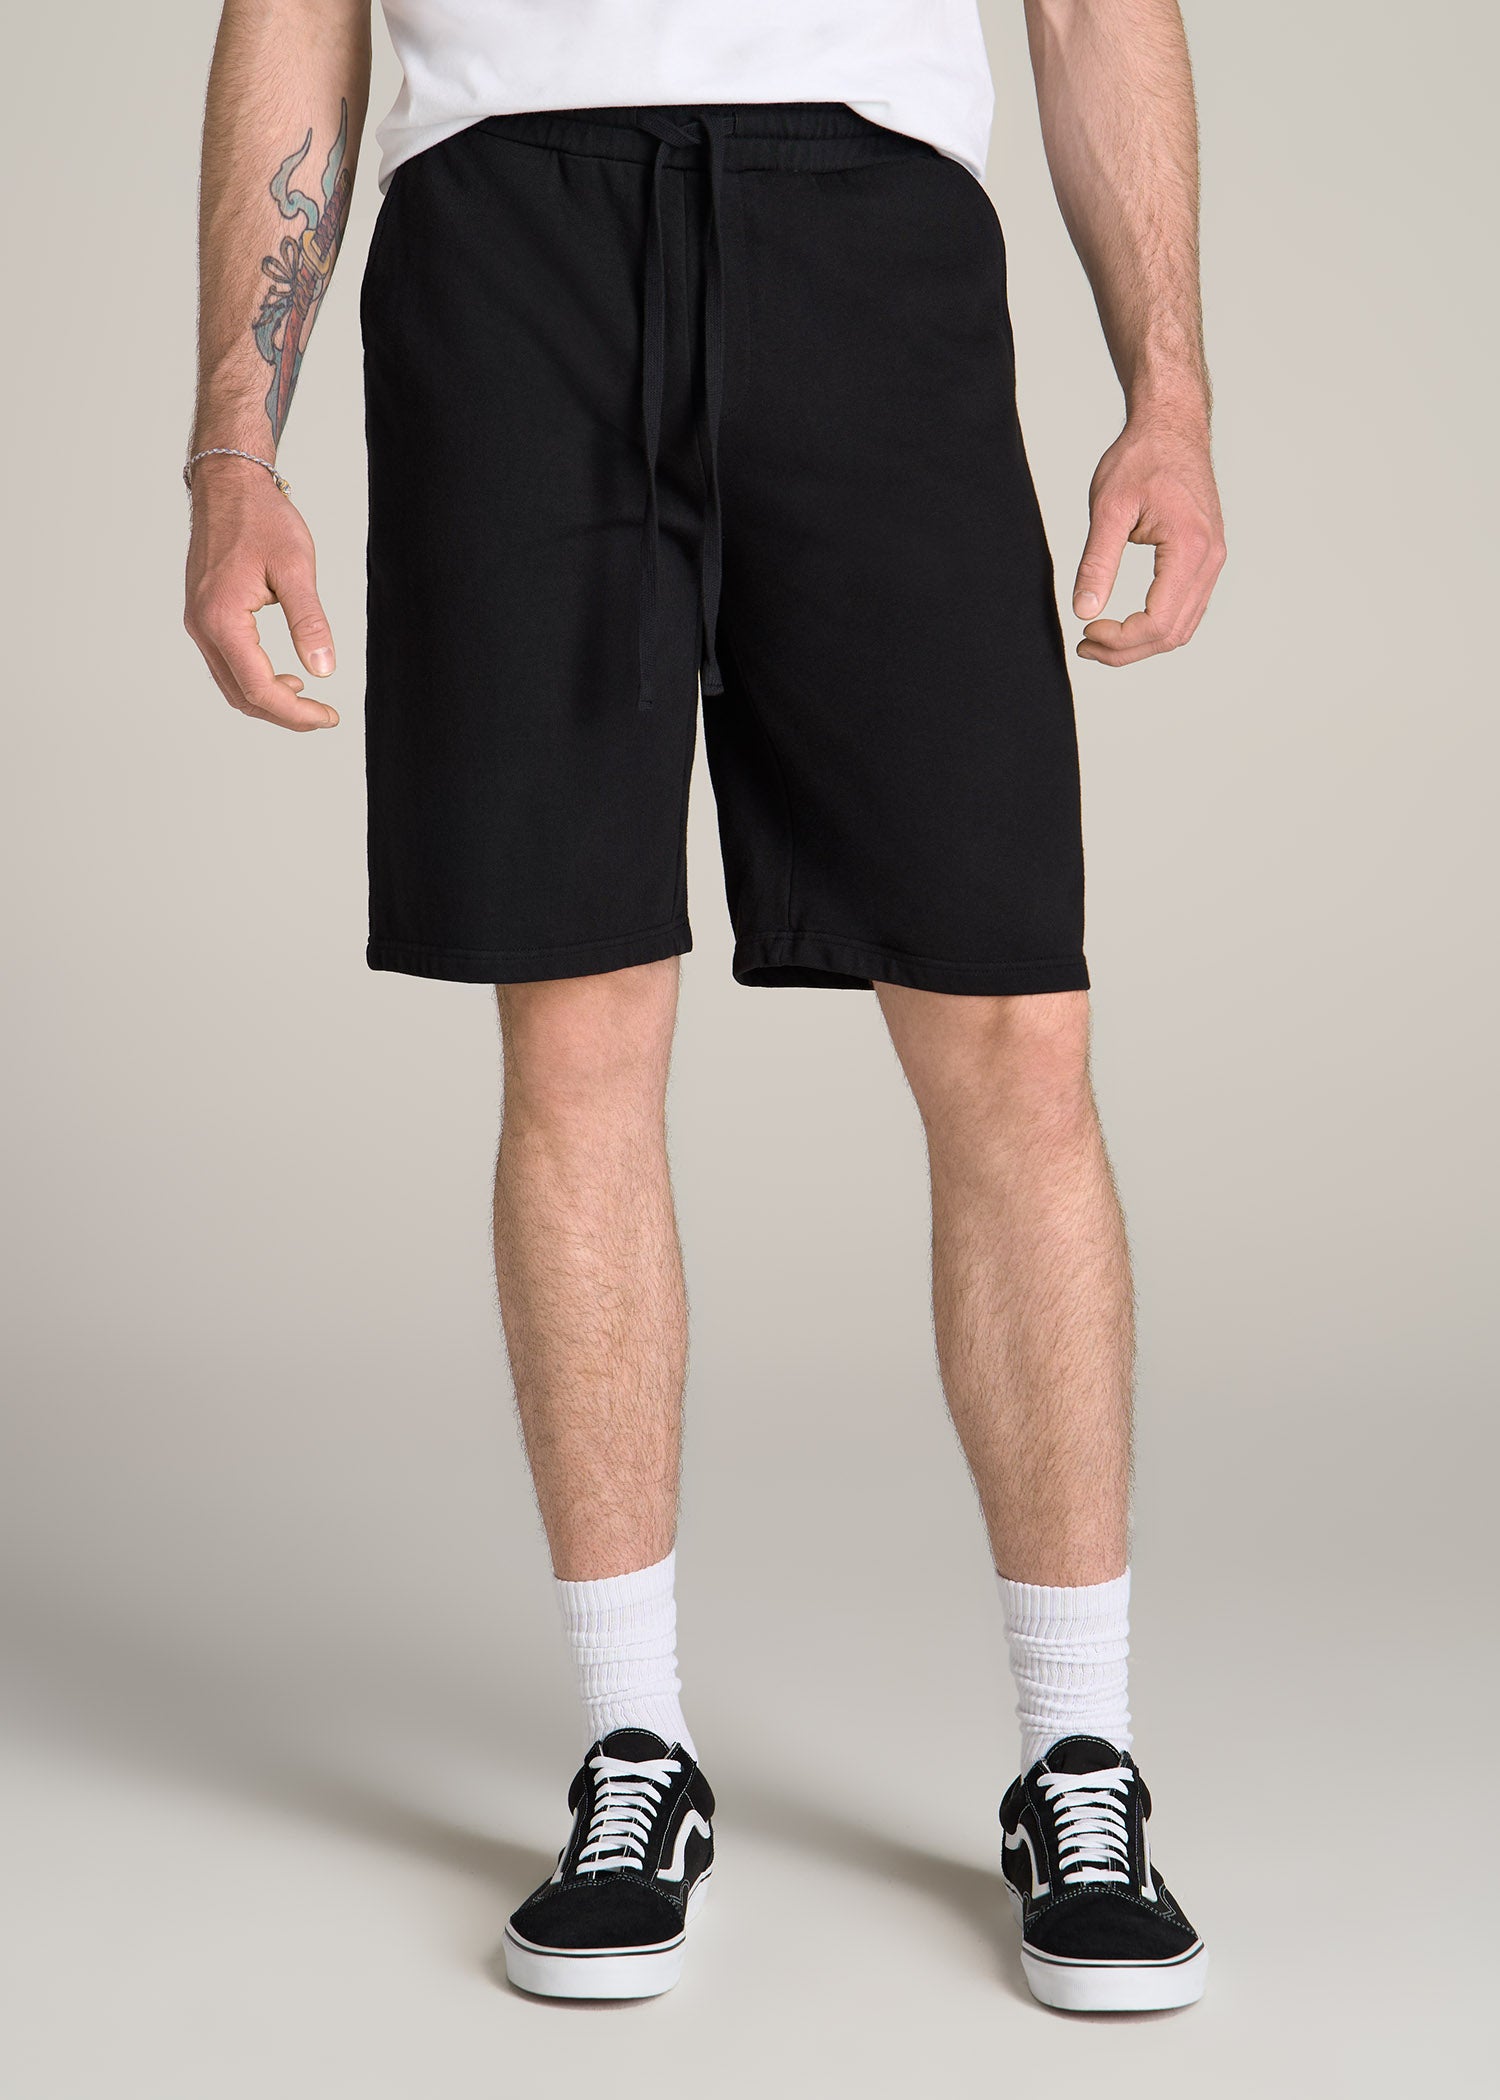 Wearever Garment-Dyed French Terry Sweat Shorts for Tall Men in Black